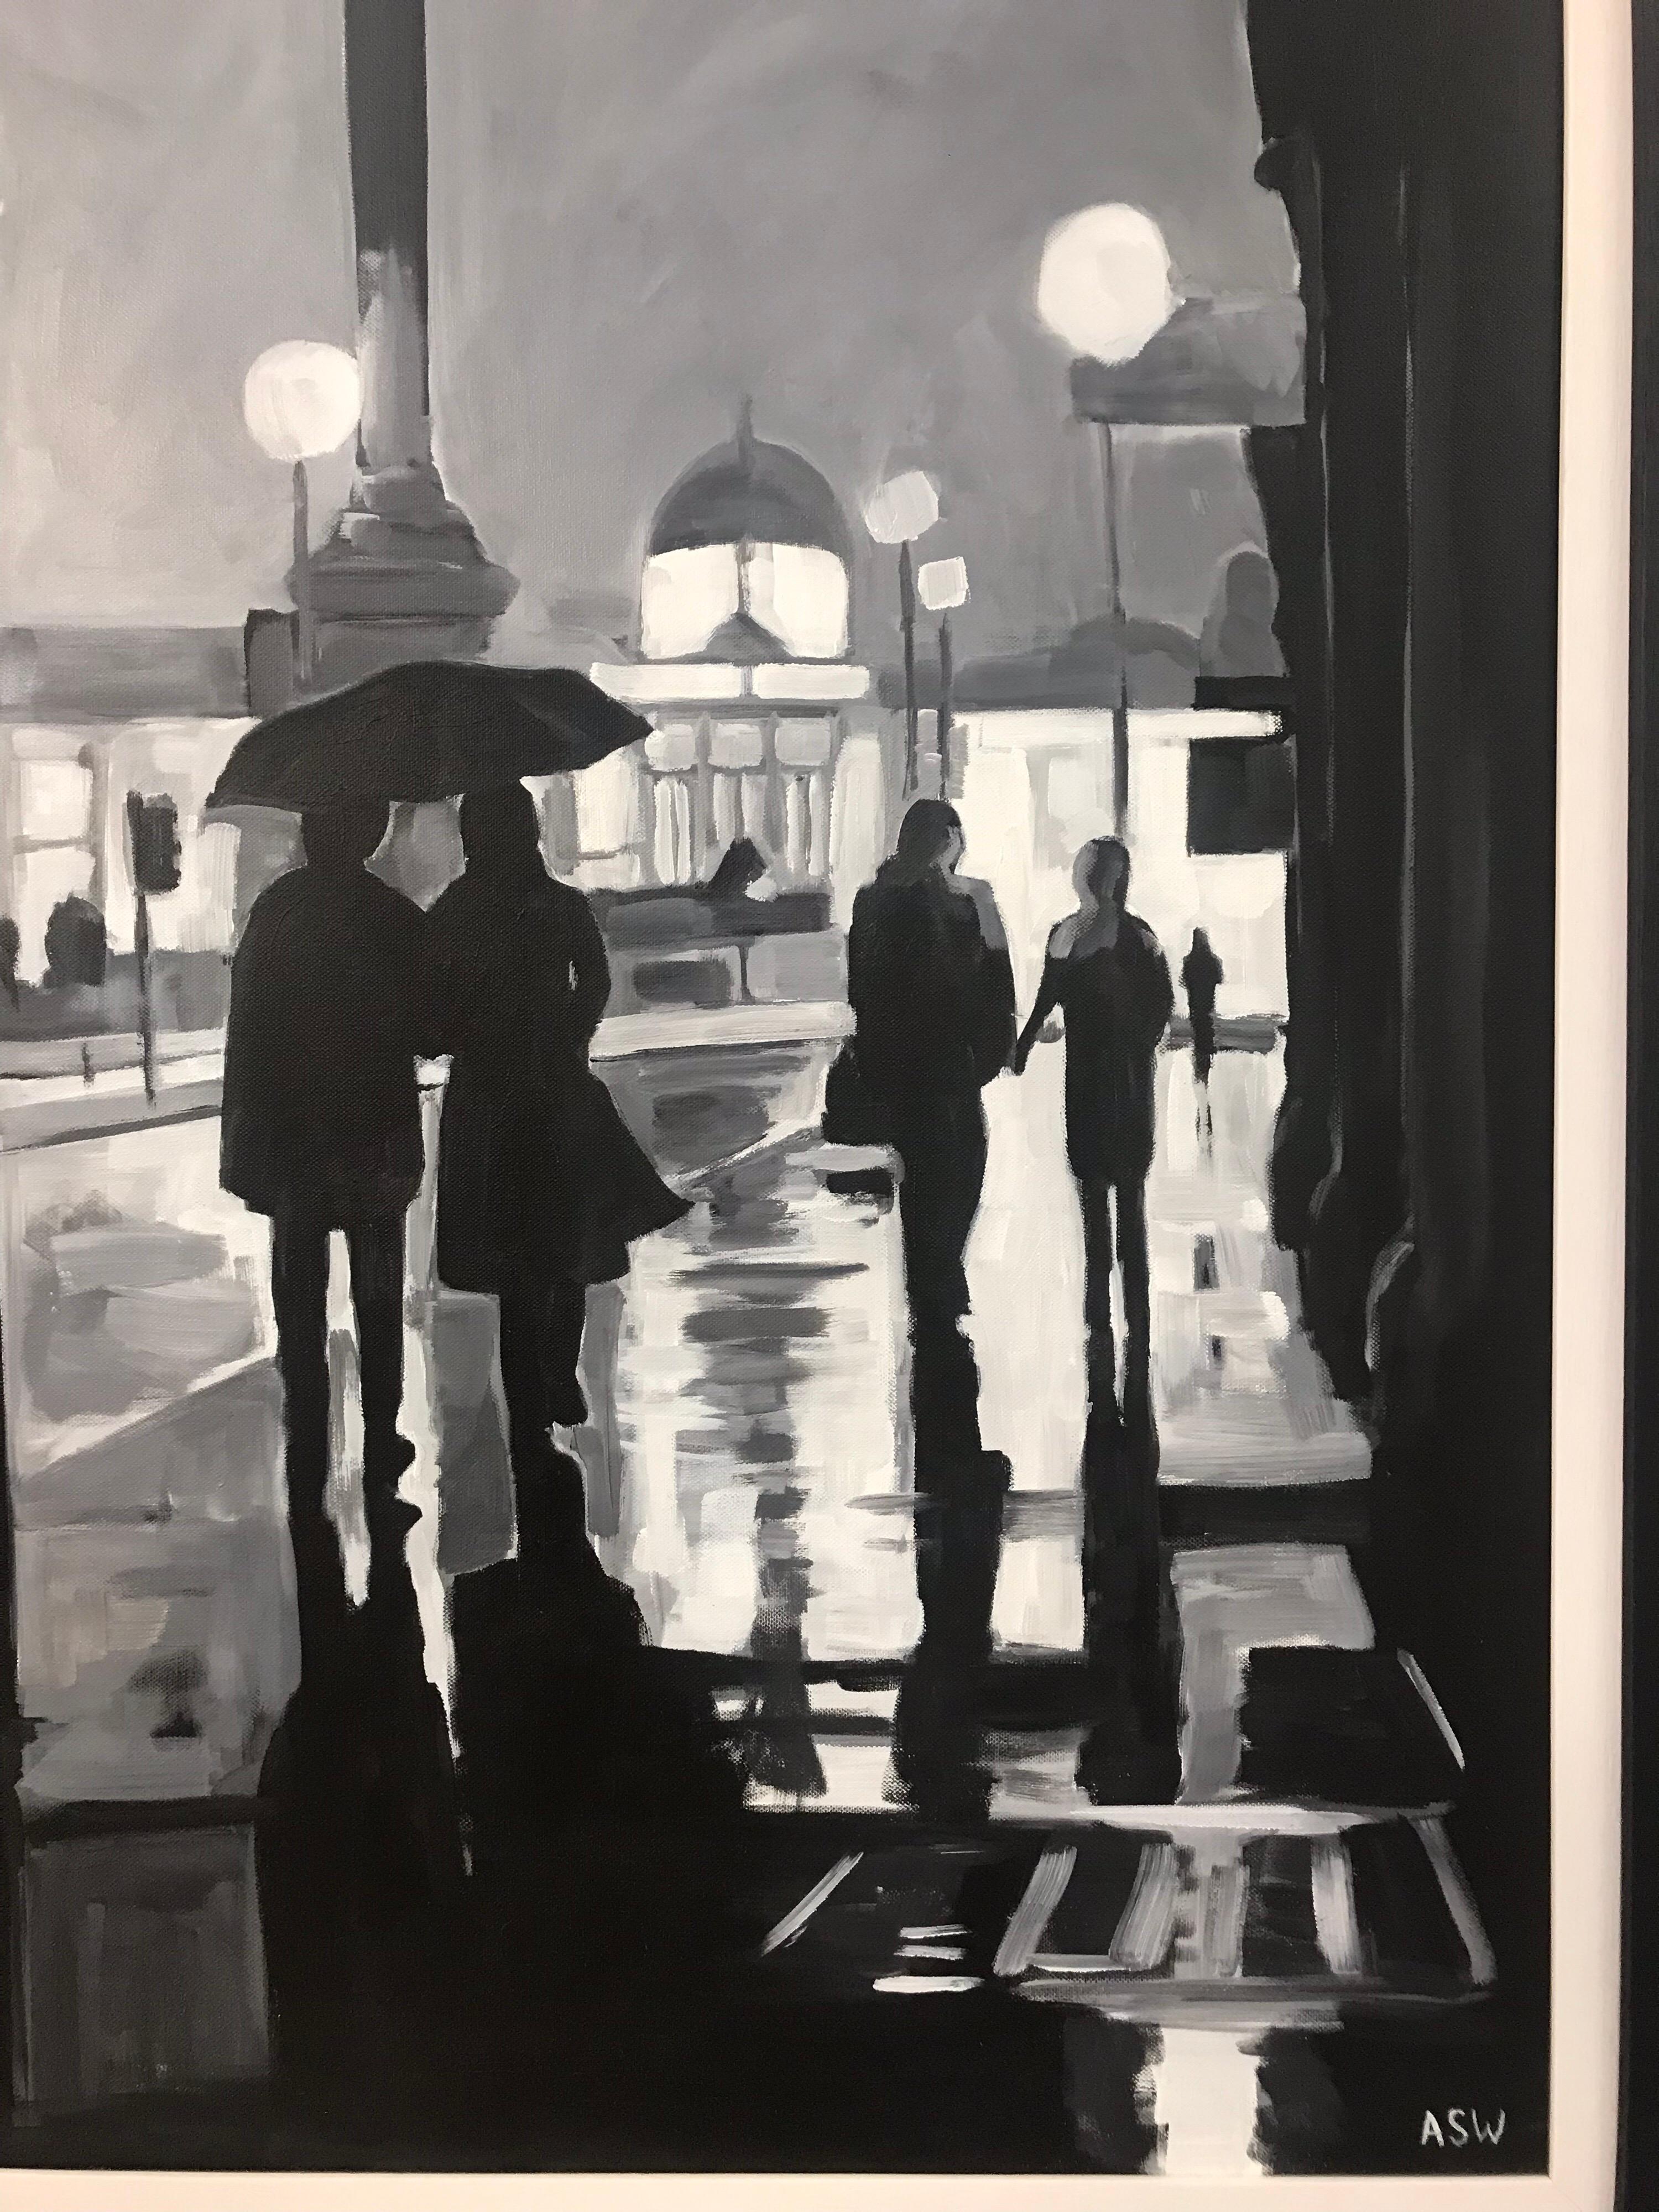 Trafalgar Square, London - Cityscape Art by British Urban Landscape Artist Angela Wakefield. This black and white painting of Trafalgar Square in London is part of the London Collection. The wet pavements provide the perfect conditions for the